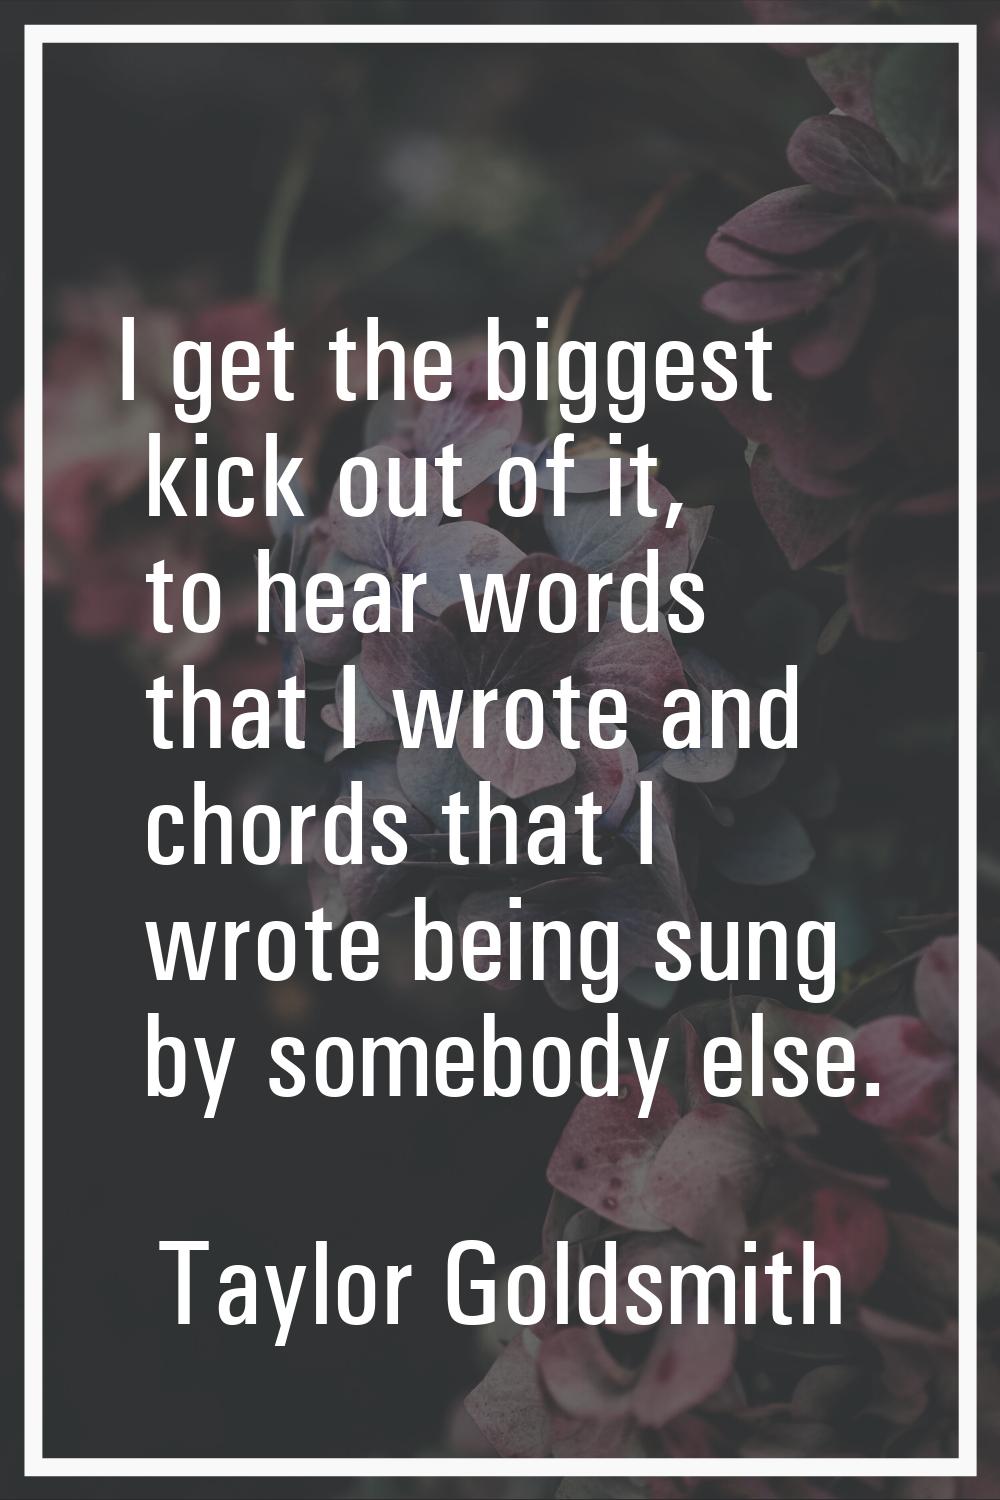 I get the biggest kick out of it, to hear words that I wrote and chords that I wrote being sung by 